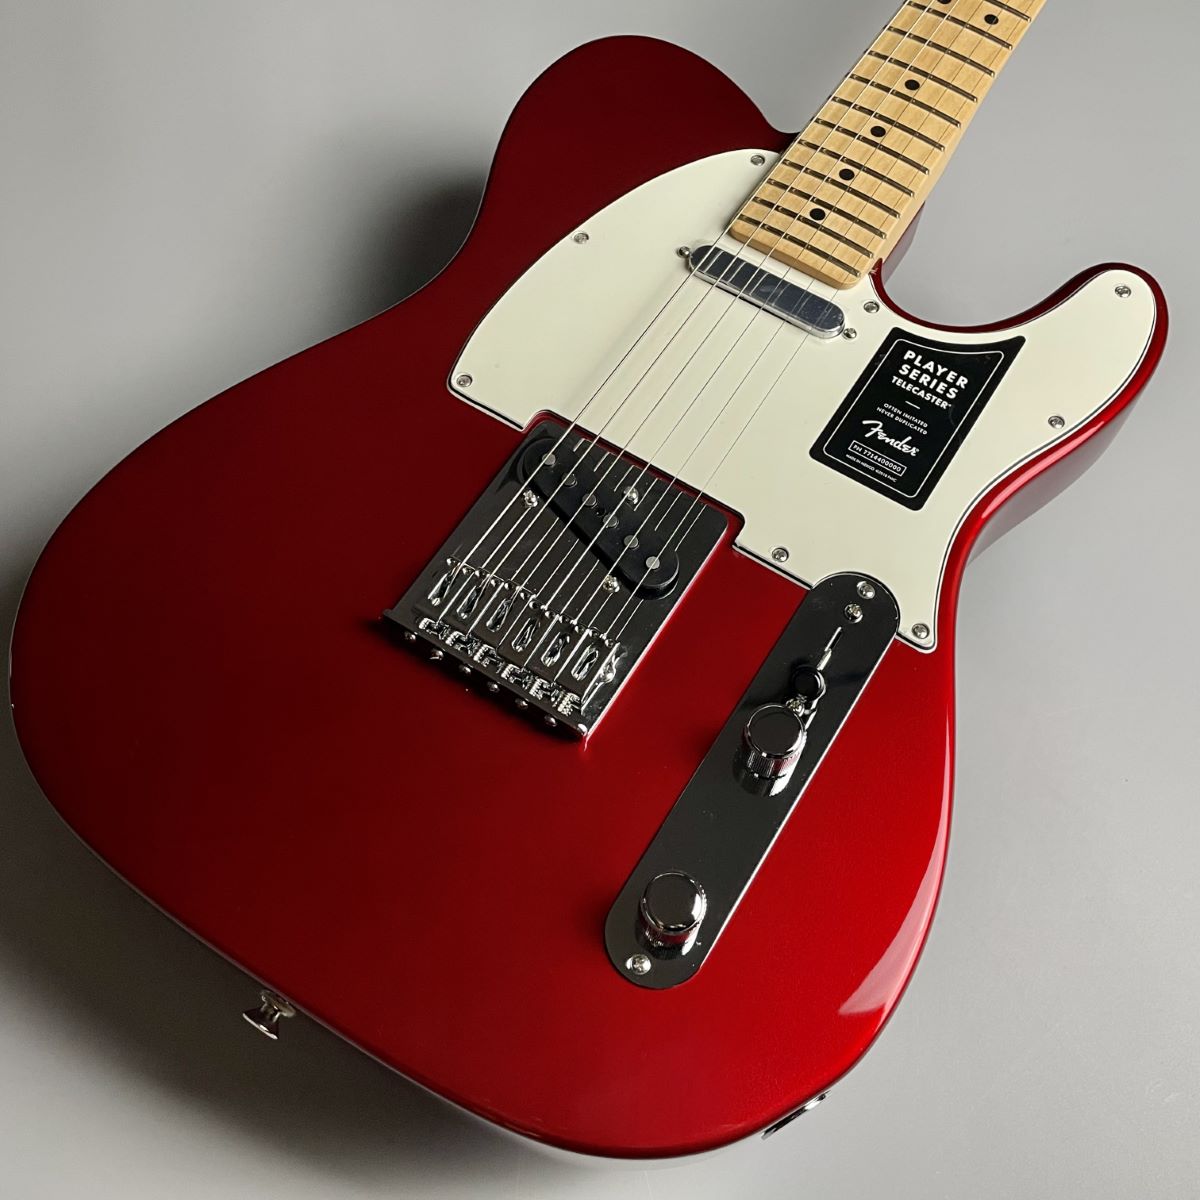 Fender Player Telecaster Candy Apple Red【現物写真】 フェンダー